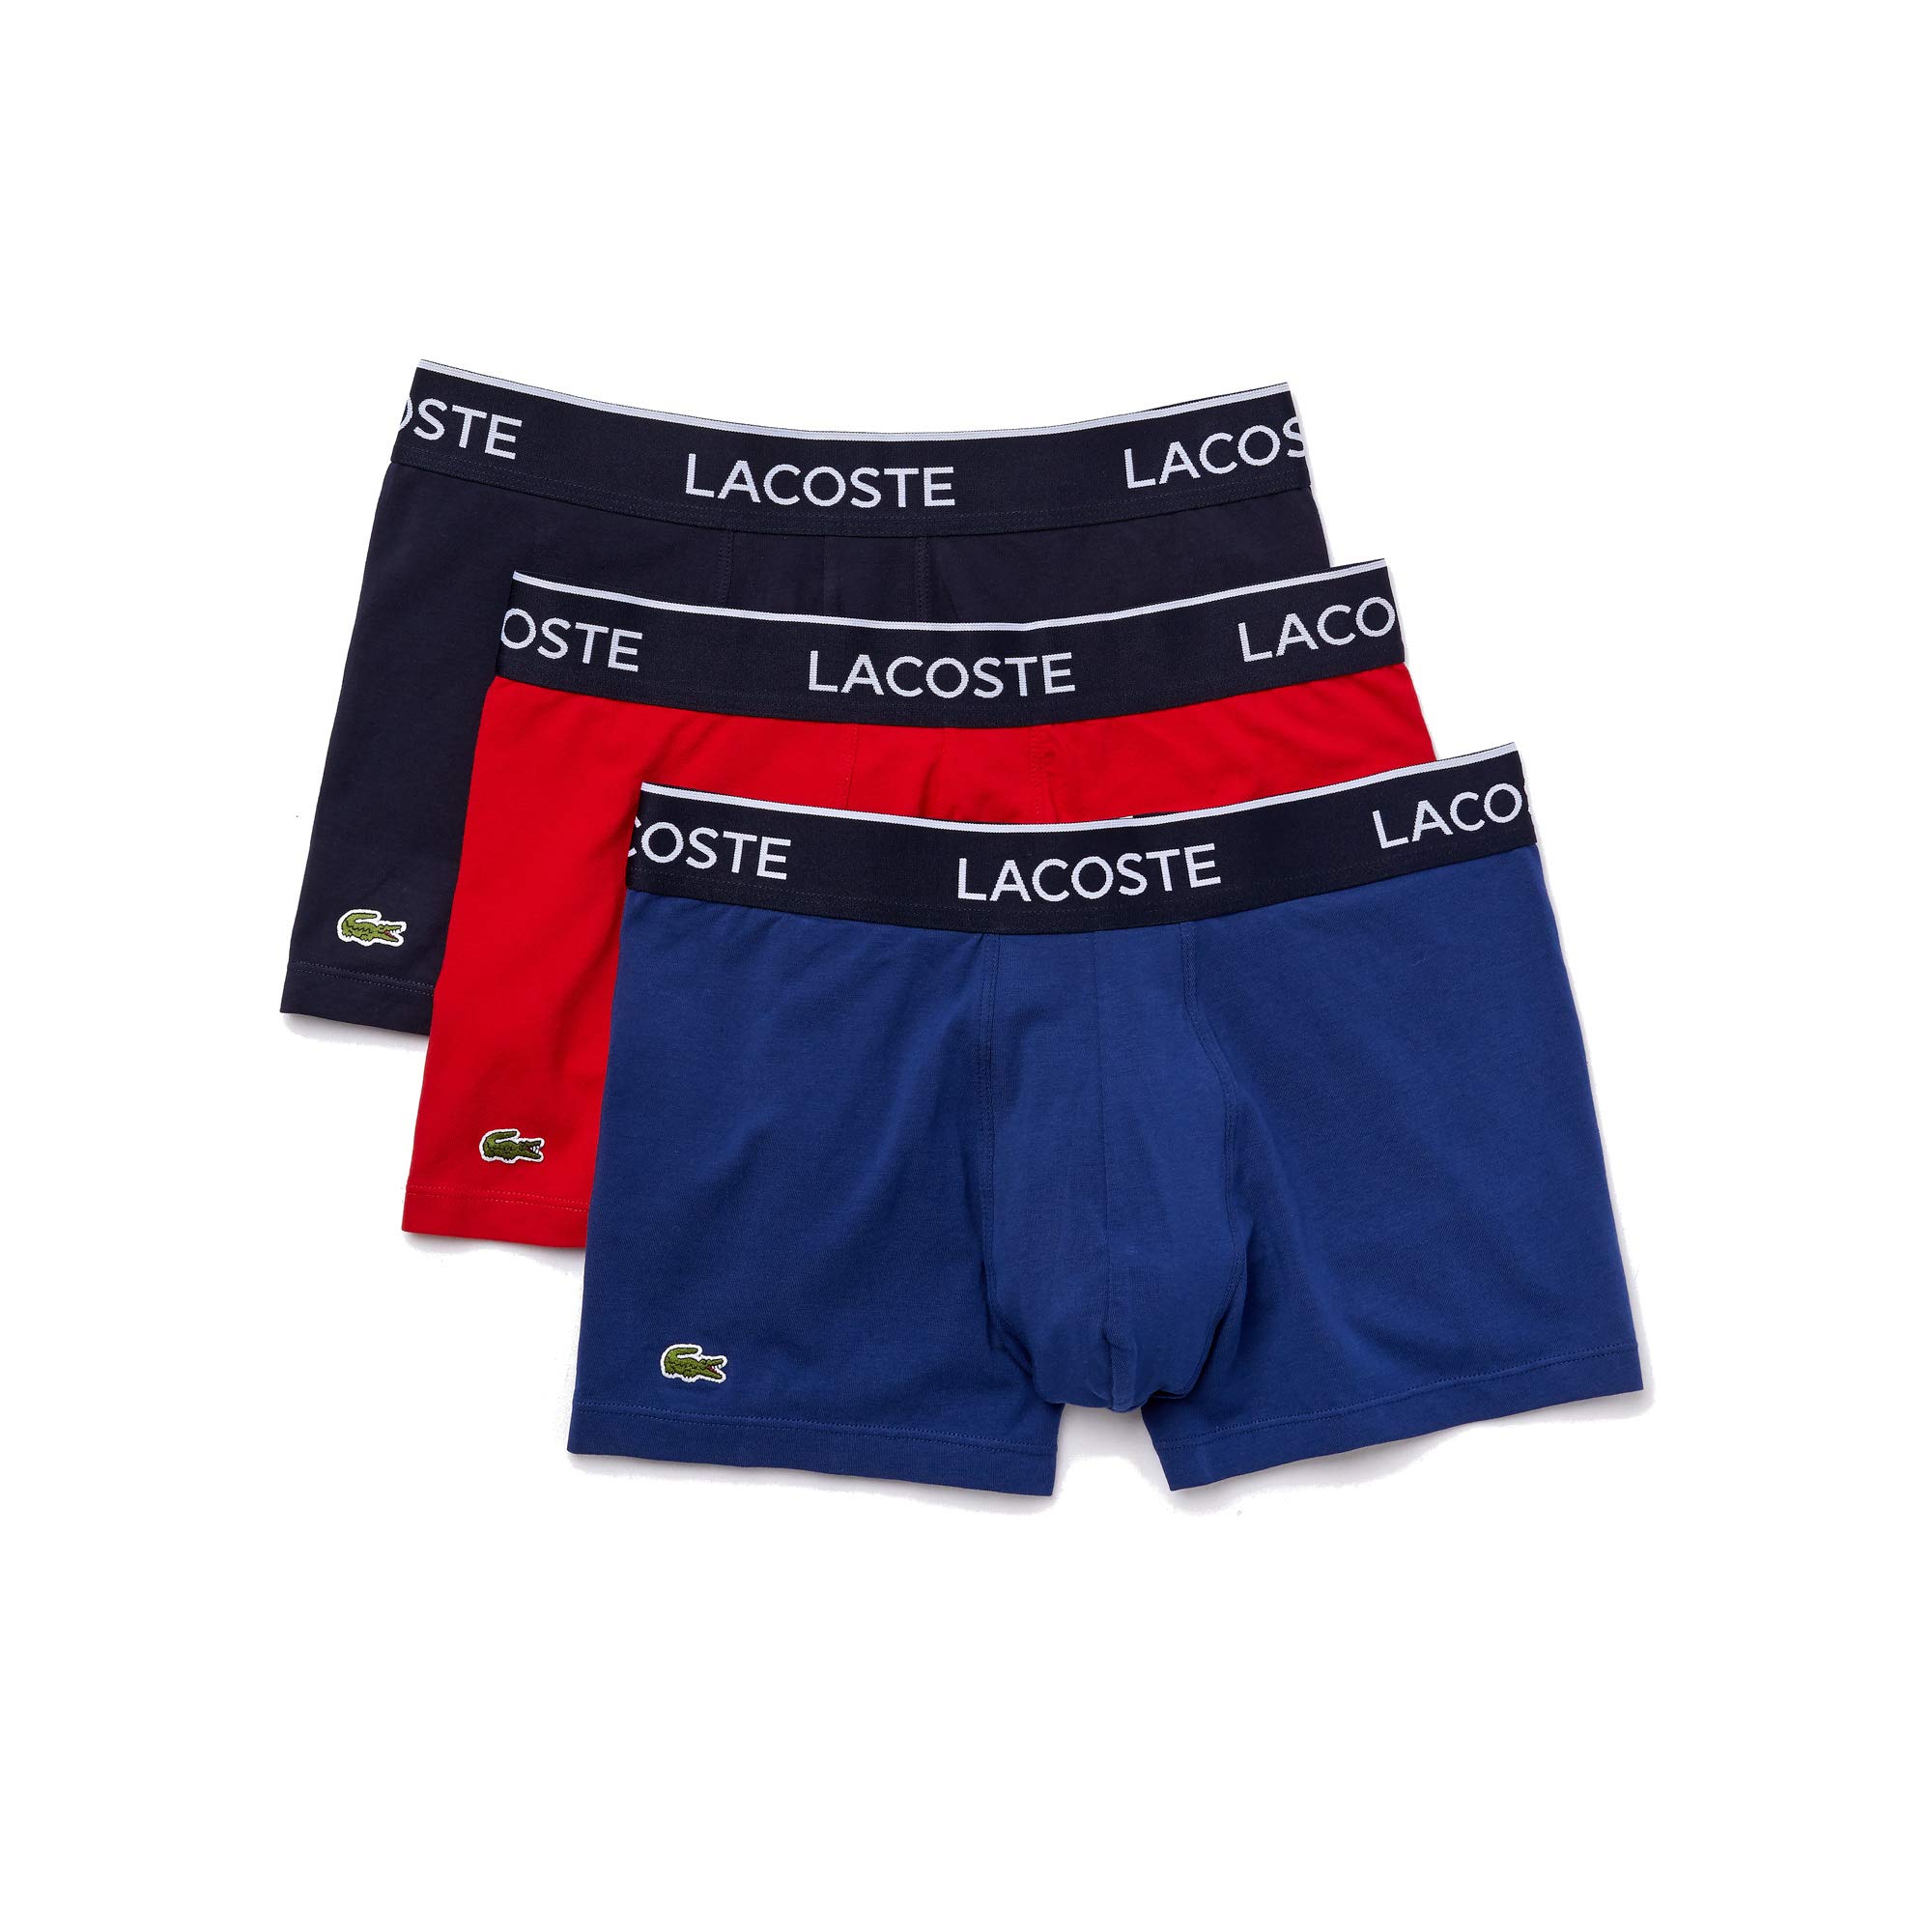 3-Pack Lacoste Men's Casual Classic Cotton Stretch Trunks (Two Color Options) $20.99 ($7 each) + Free Shipping w/ Prime or on $25+